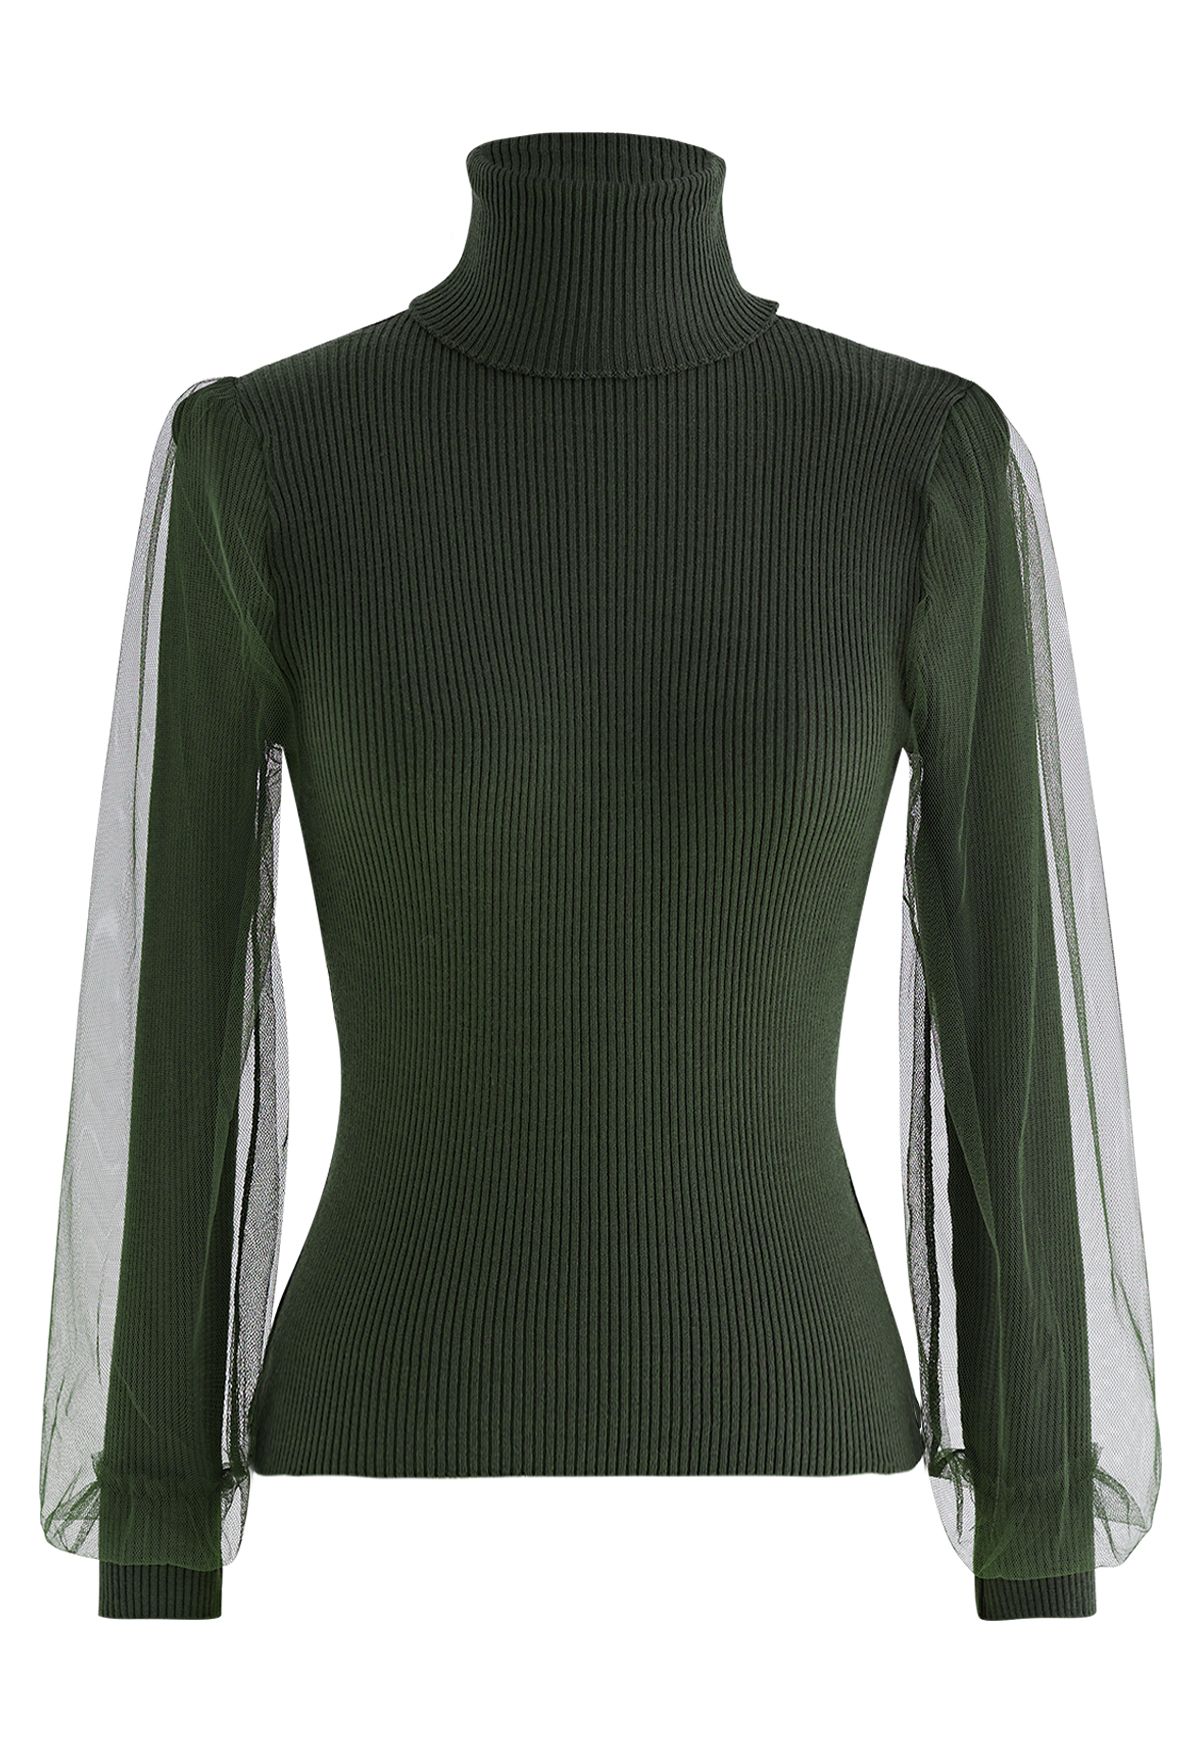 Turtleneck Mesh Overlay Sleeve Knit Top in Army Green